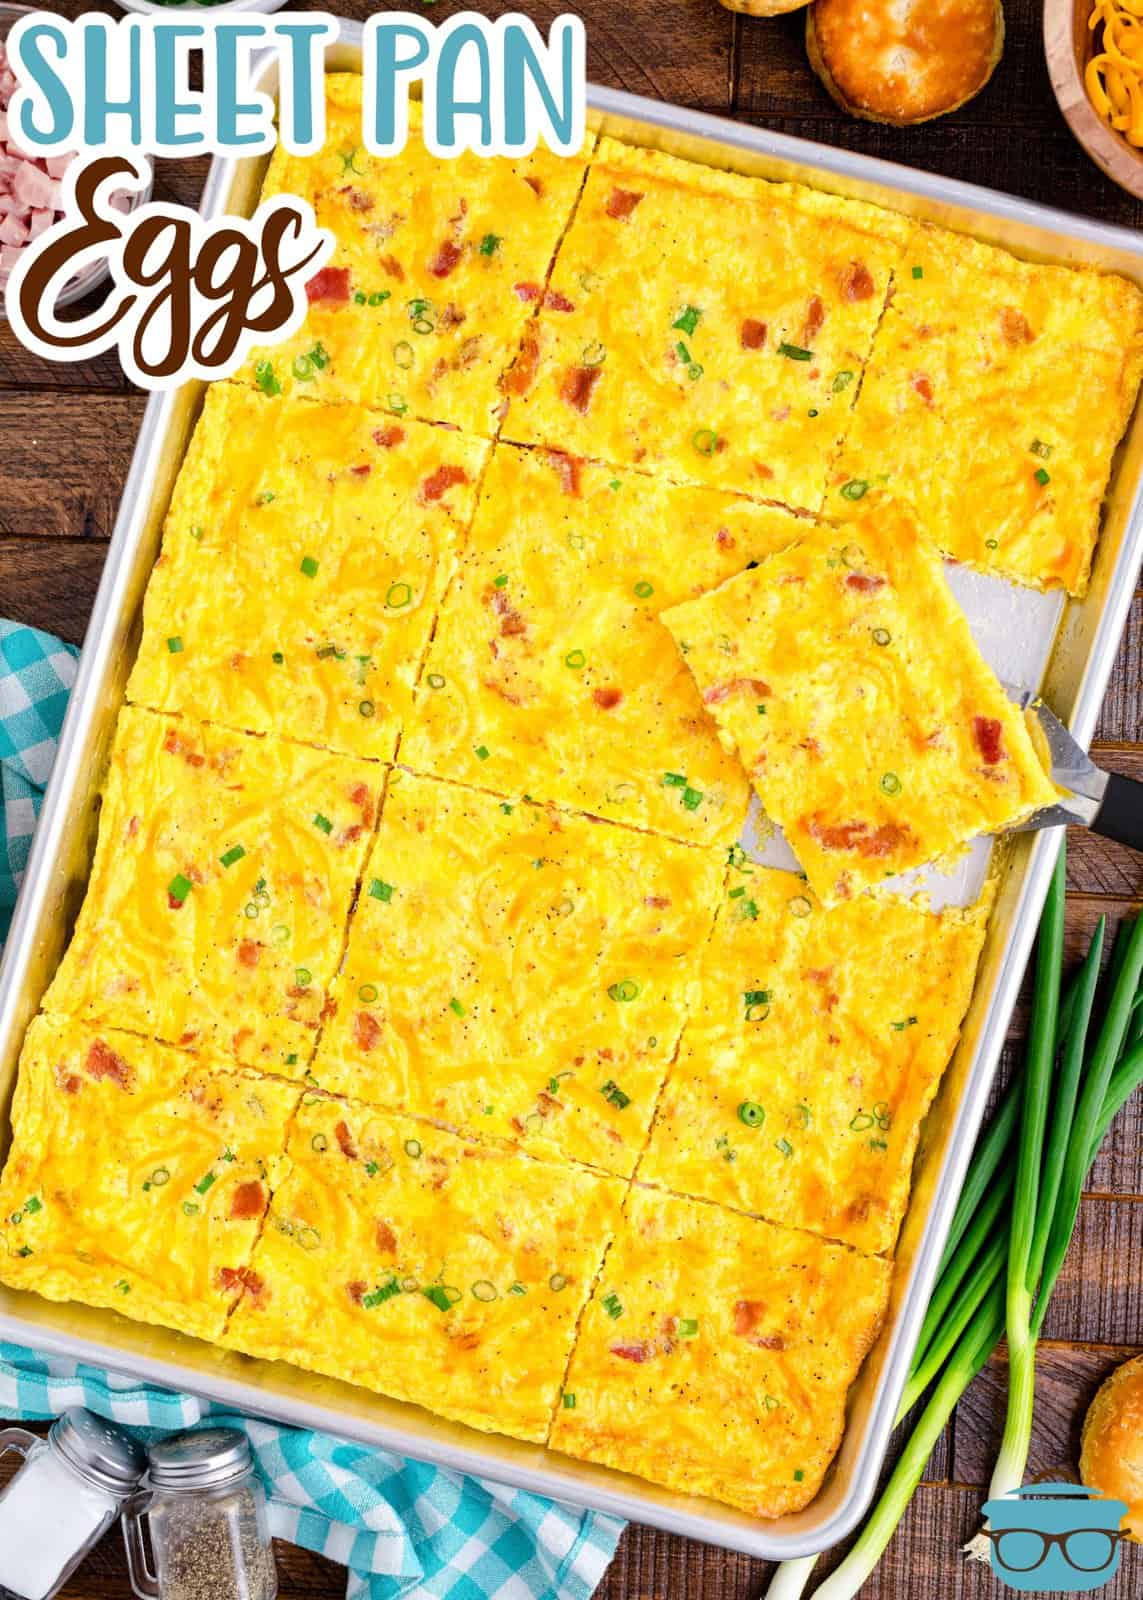 An angled baking tray with baked eggs on top.